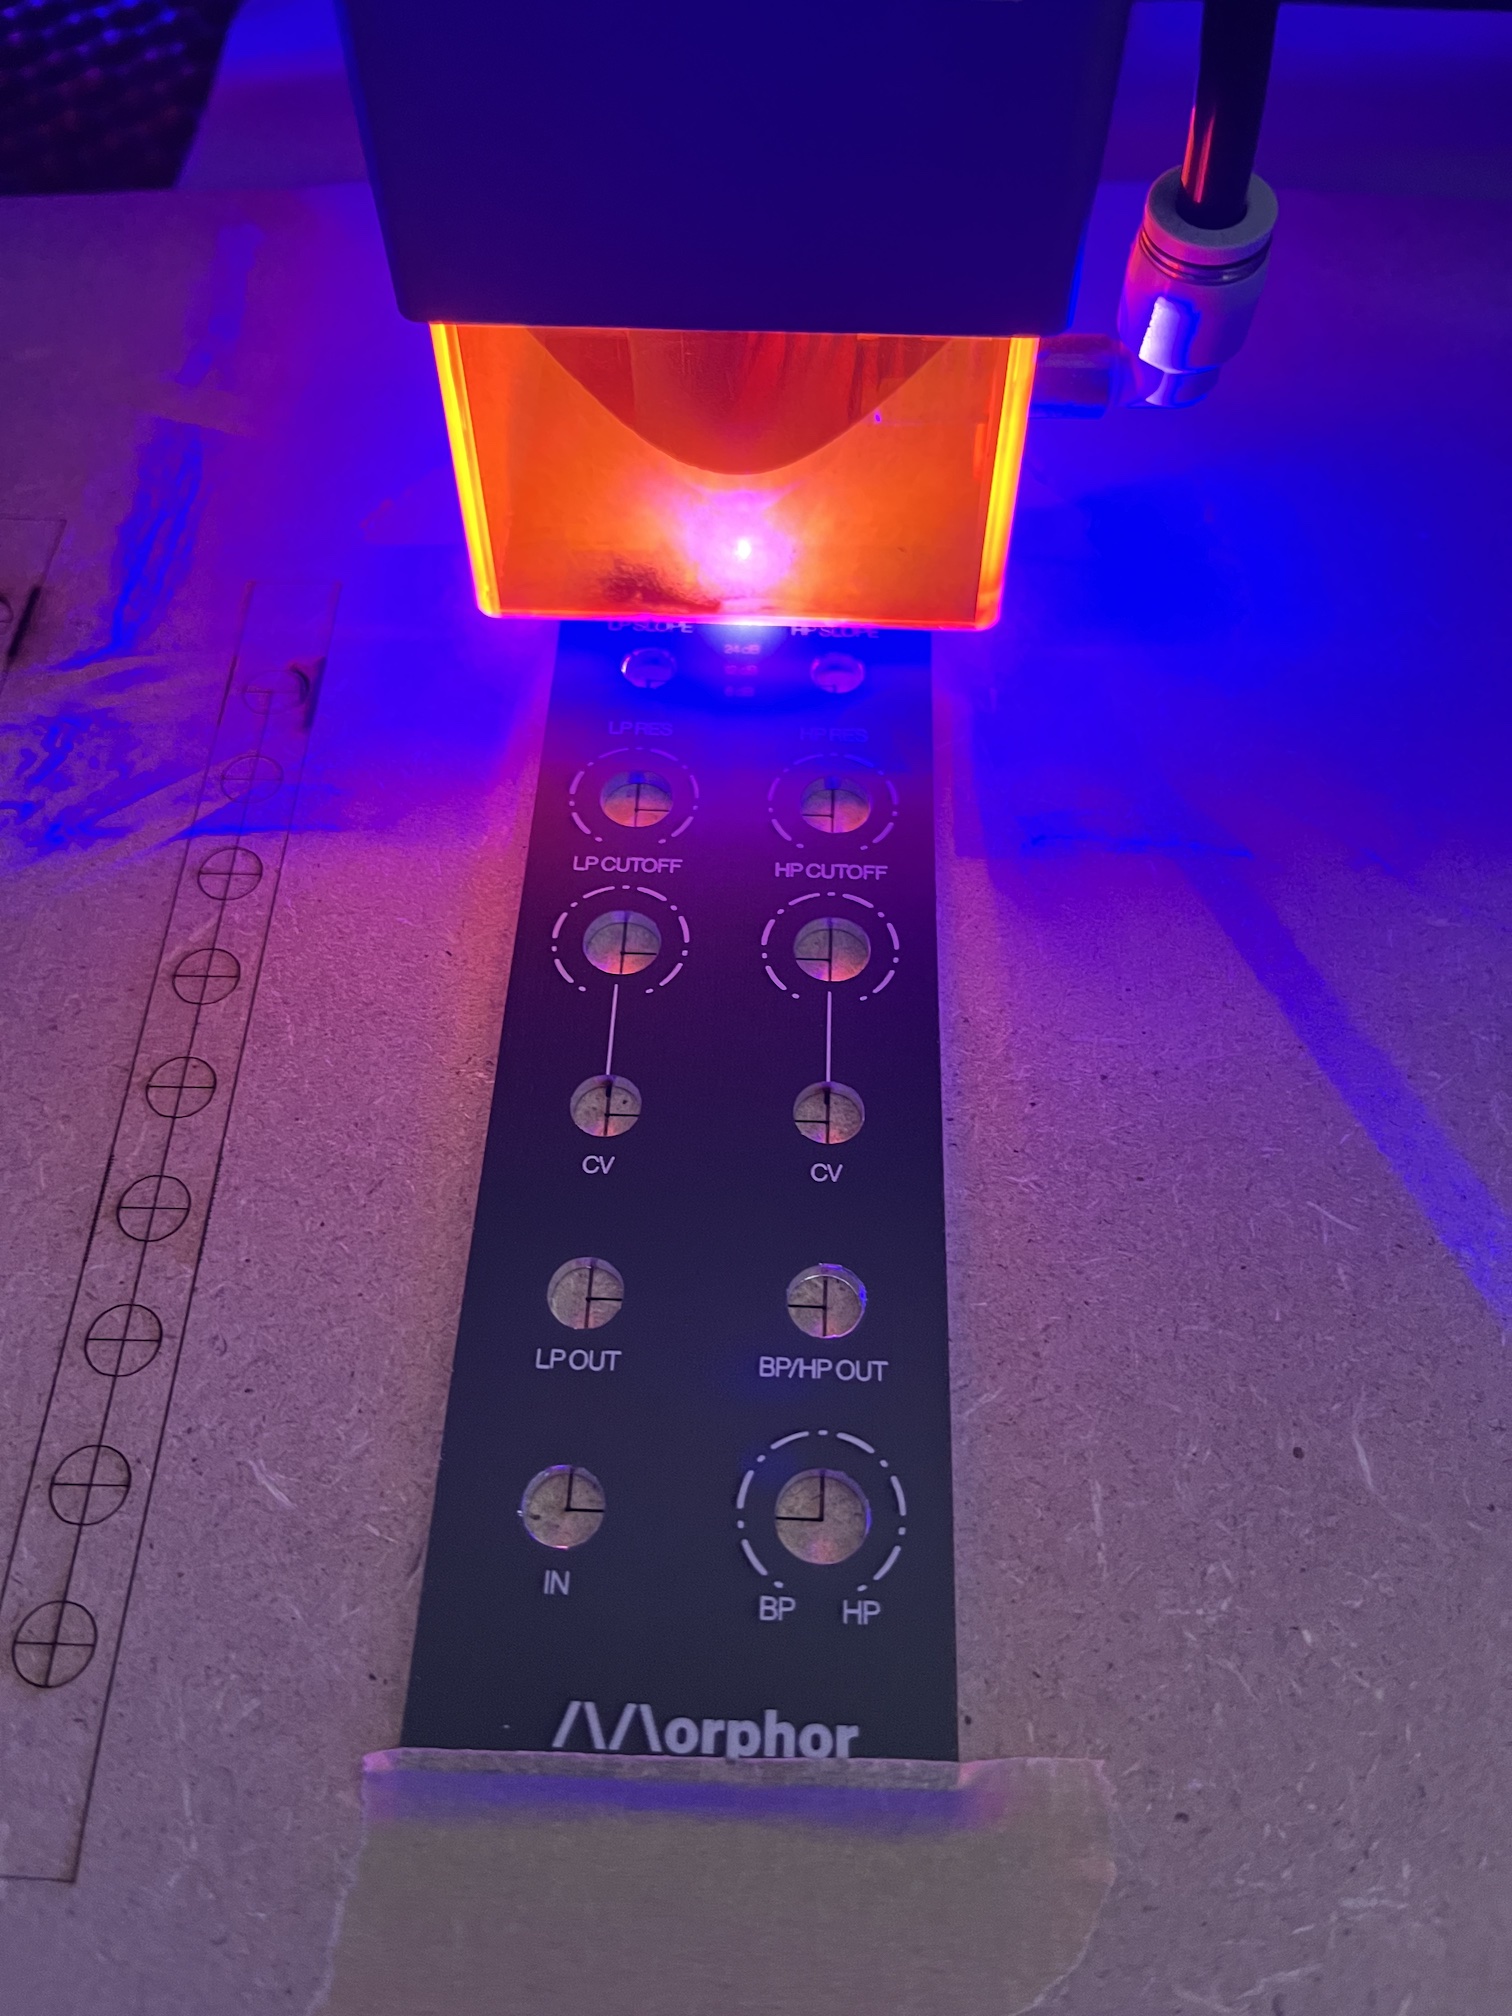 Prototyping with laser